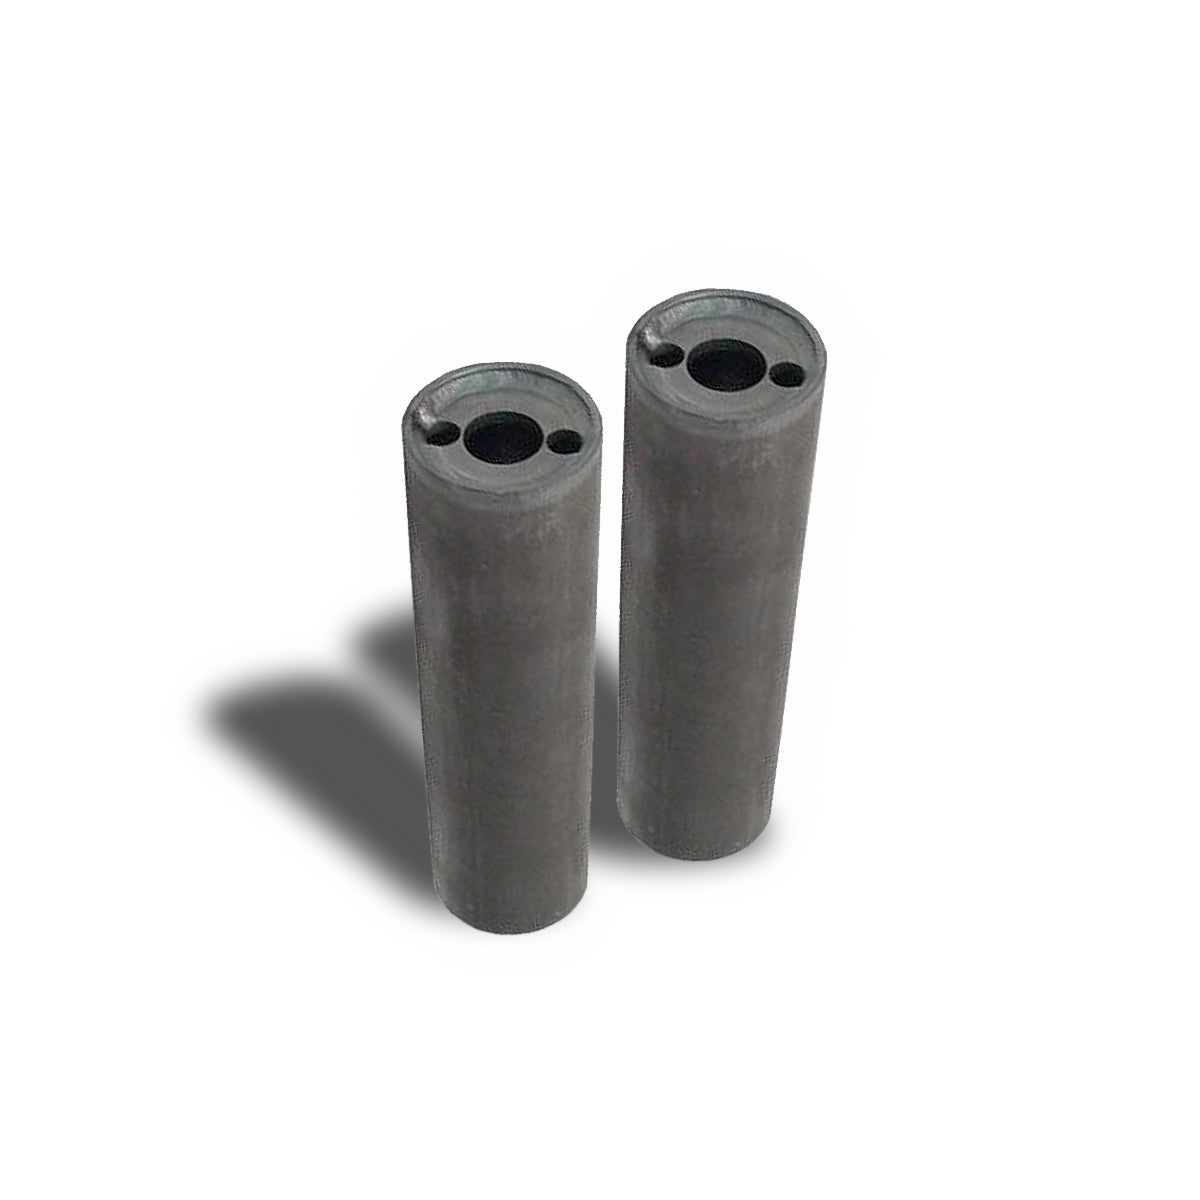 King Shocks 2.0x2" Bump Stops with Mounting Cans